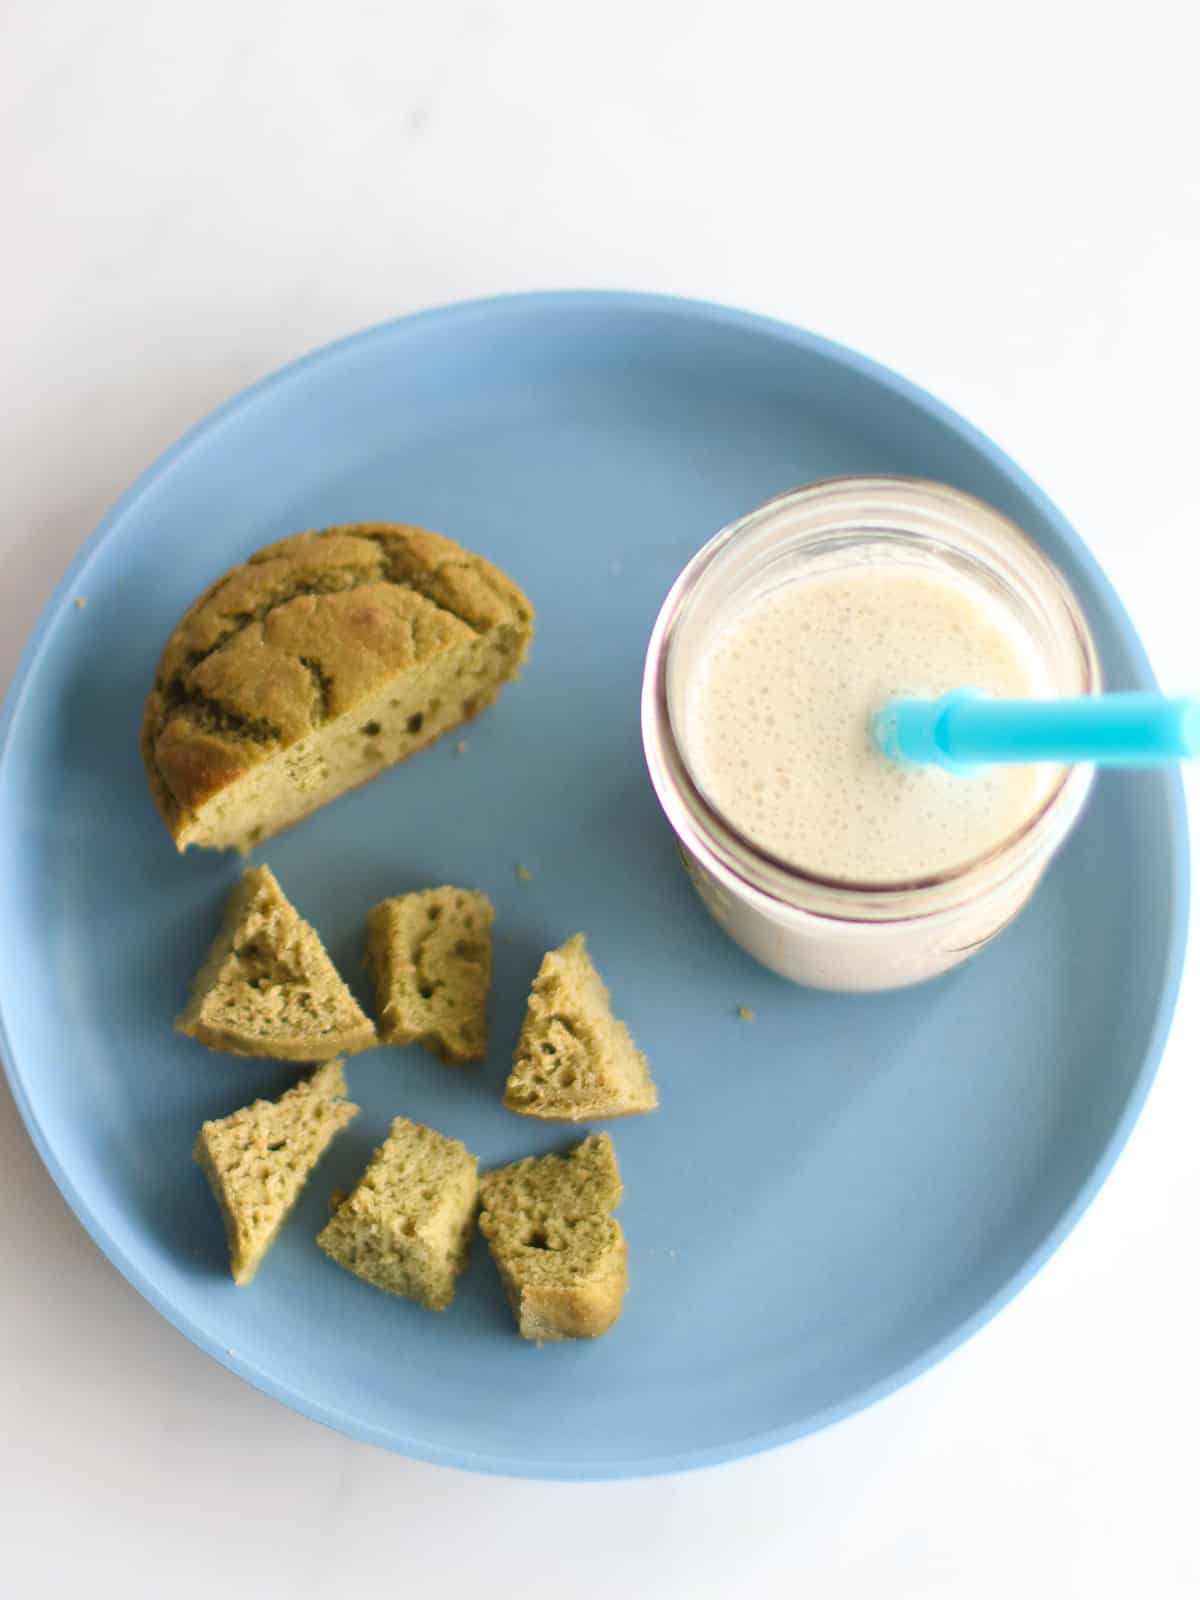 Banana milk with spinach muffin on a blue plate.